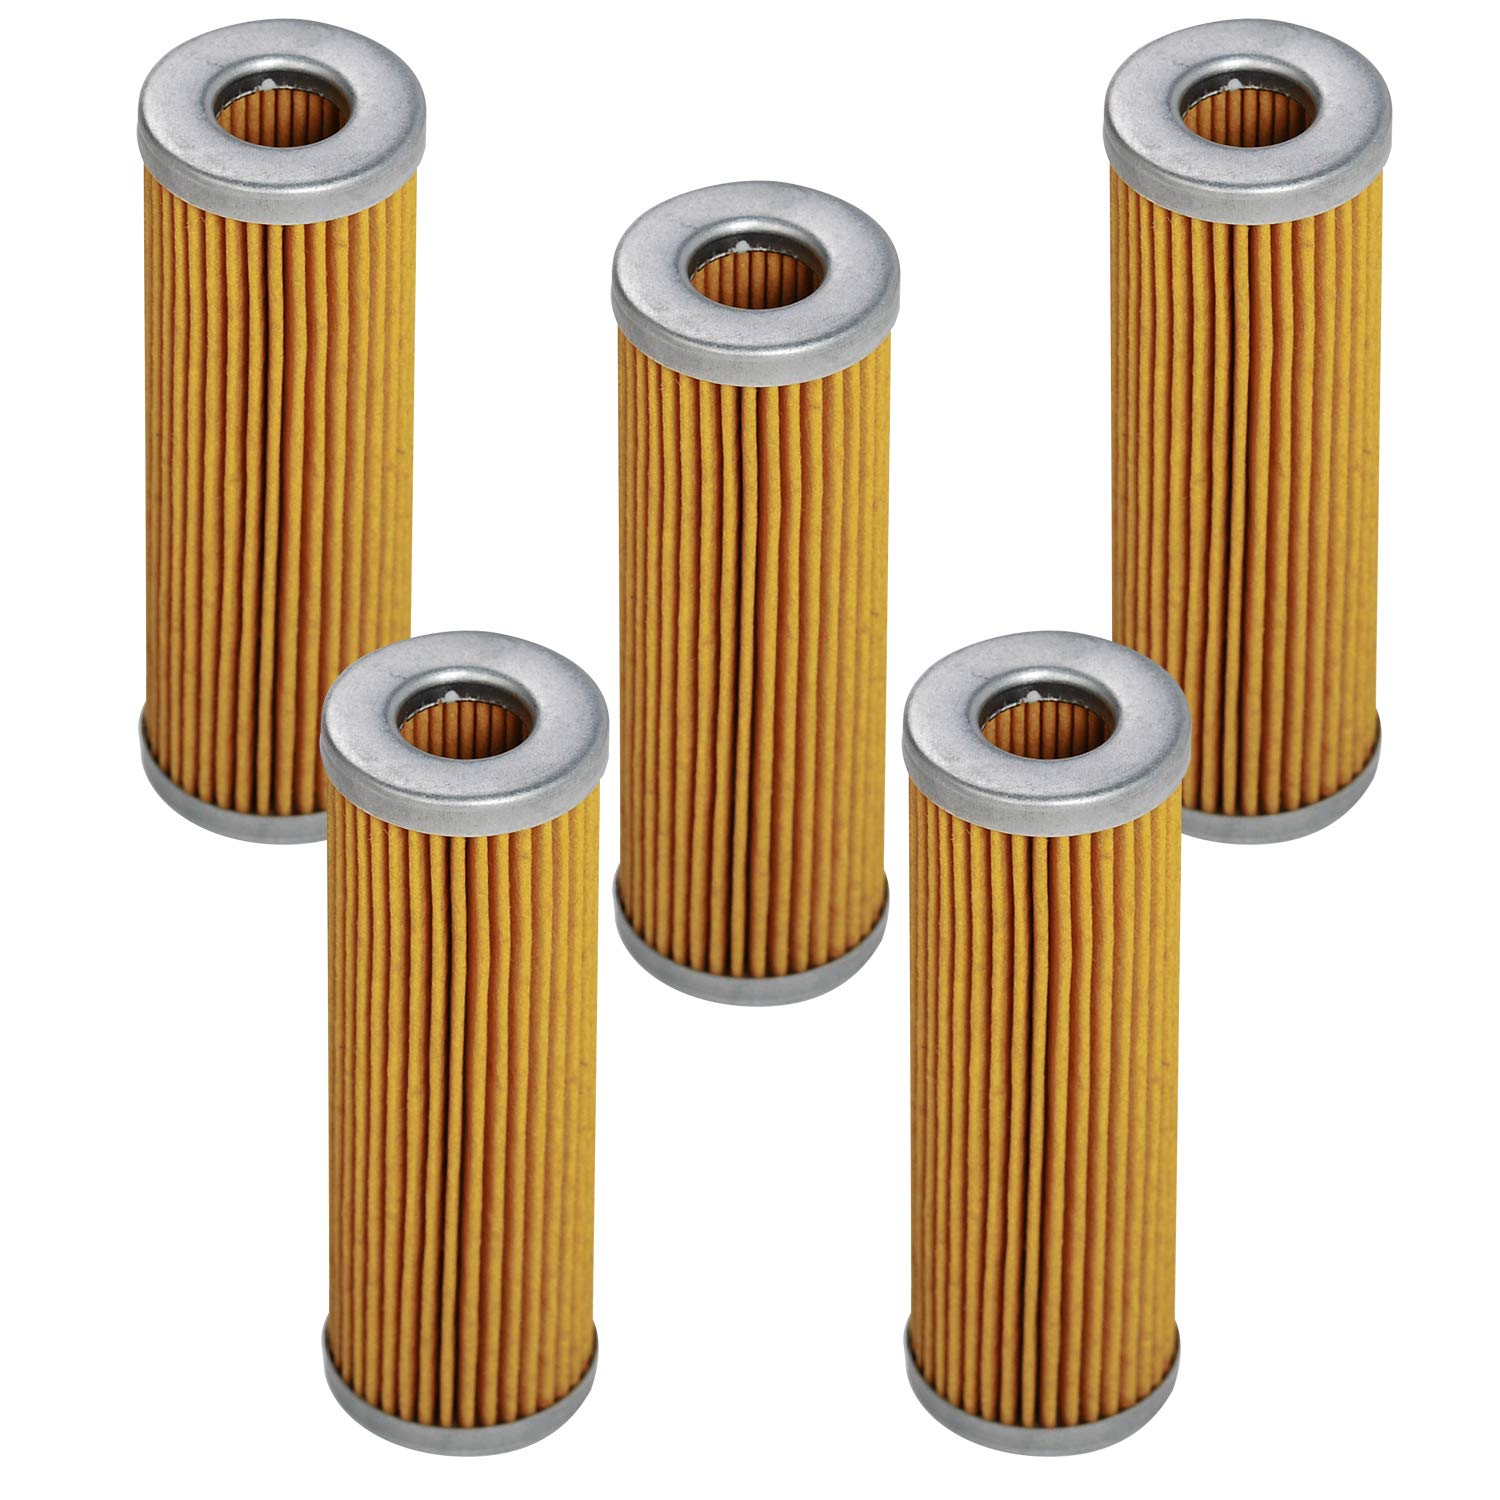 HIFROM Fuel Filter Replacement for KUBOTA B1550 B1700 B1750 B1750HST B20 B21 B2100 B2100DT B2150 B2400 B2400 B4200 B5100 B5200 B6000 B6100 15231-43560 1T021-43560 14301-12470 (Pack of 5) von hifrom